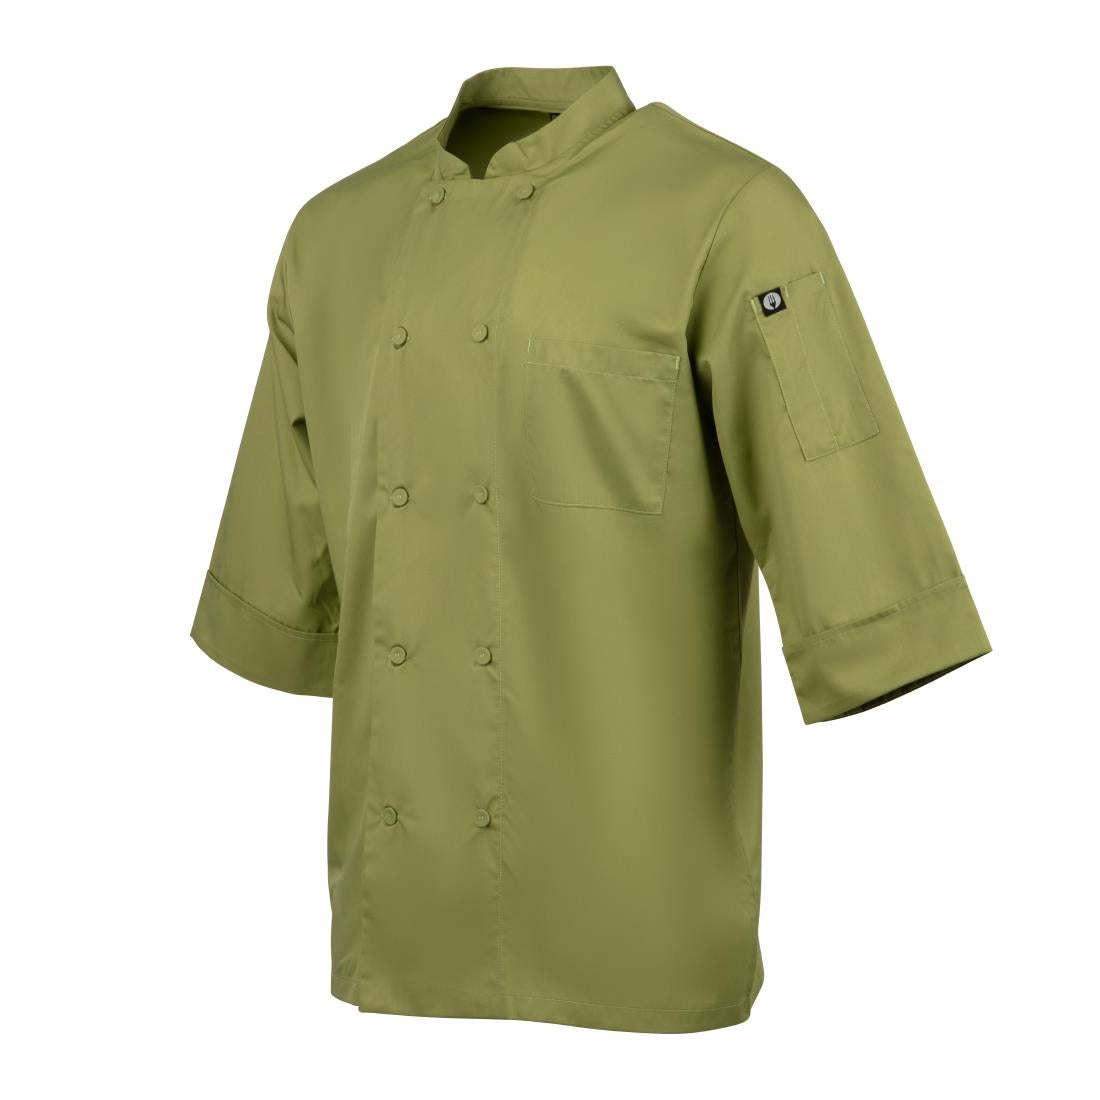 B107-S Chef Works Unisex Chefs Jacket Lime S JD Catering Equipment Solutions Ltd